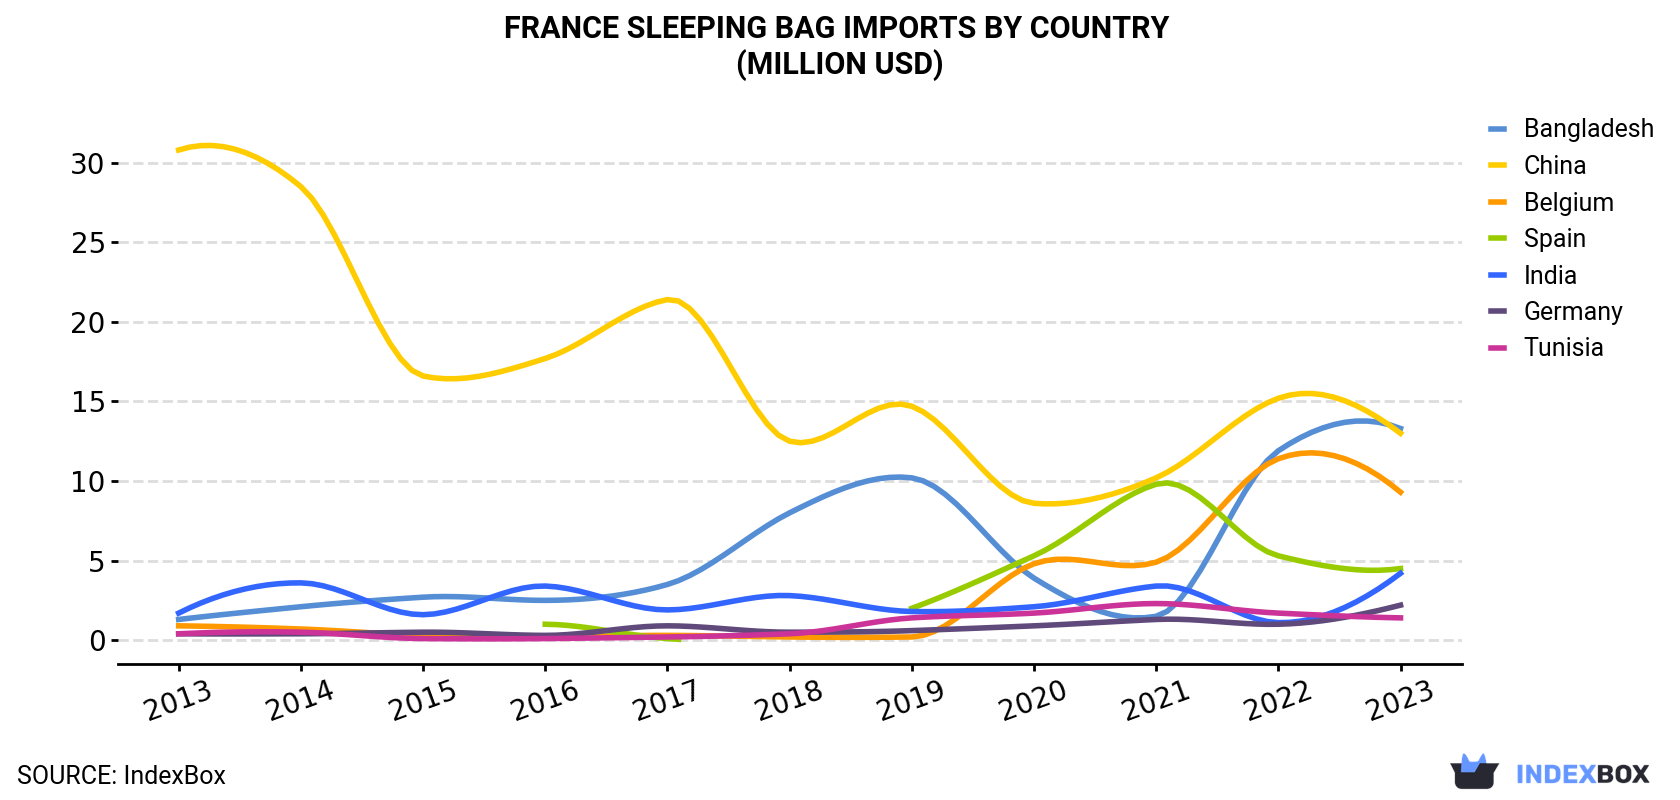 France Sleeping Bag Imports By Country (Million USD)